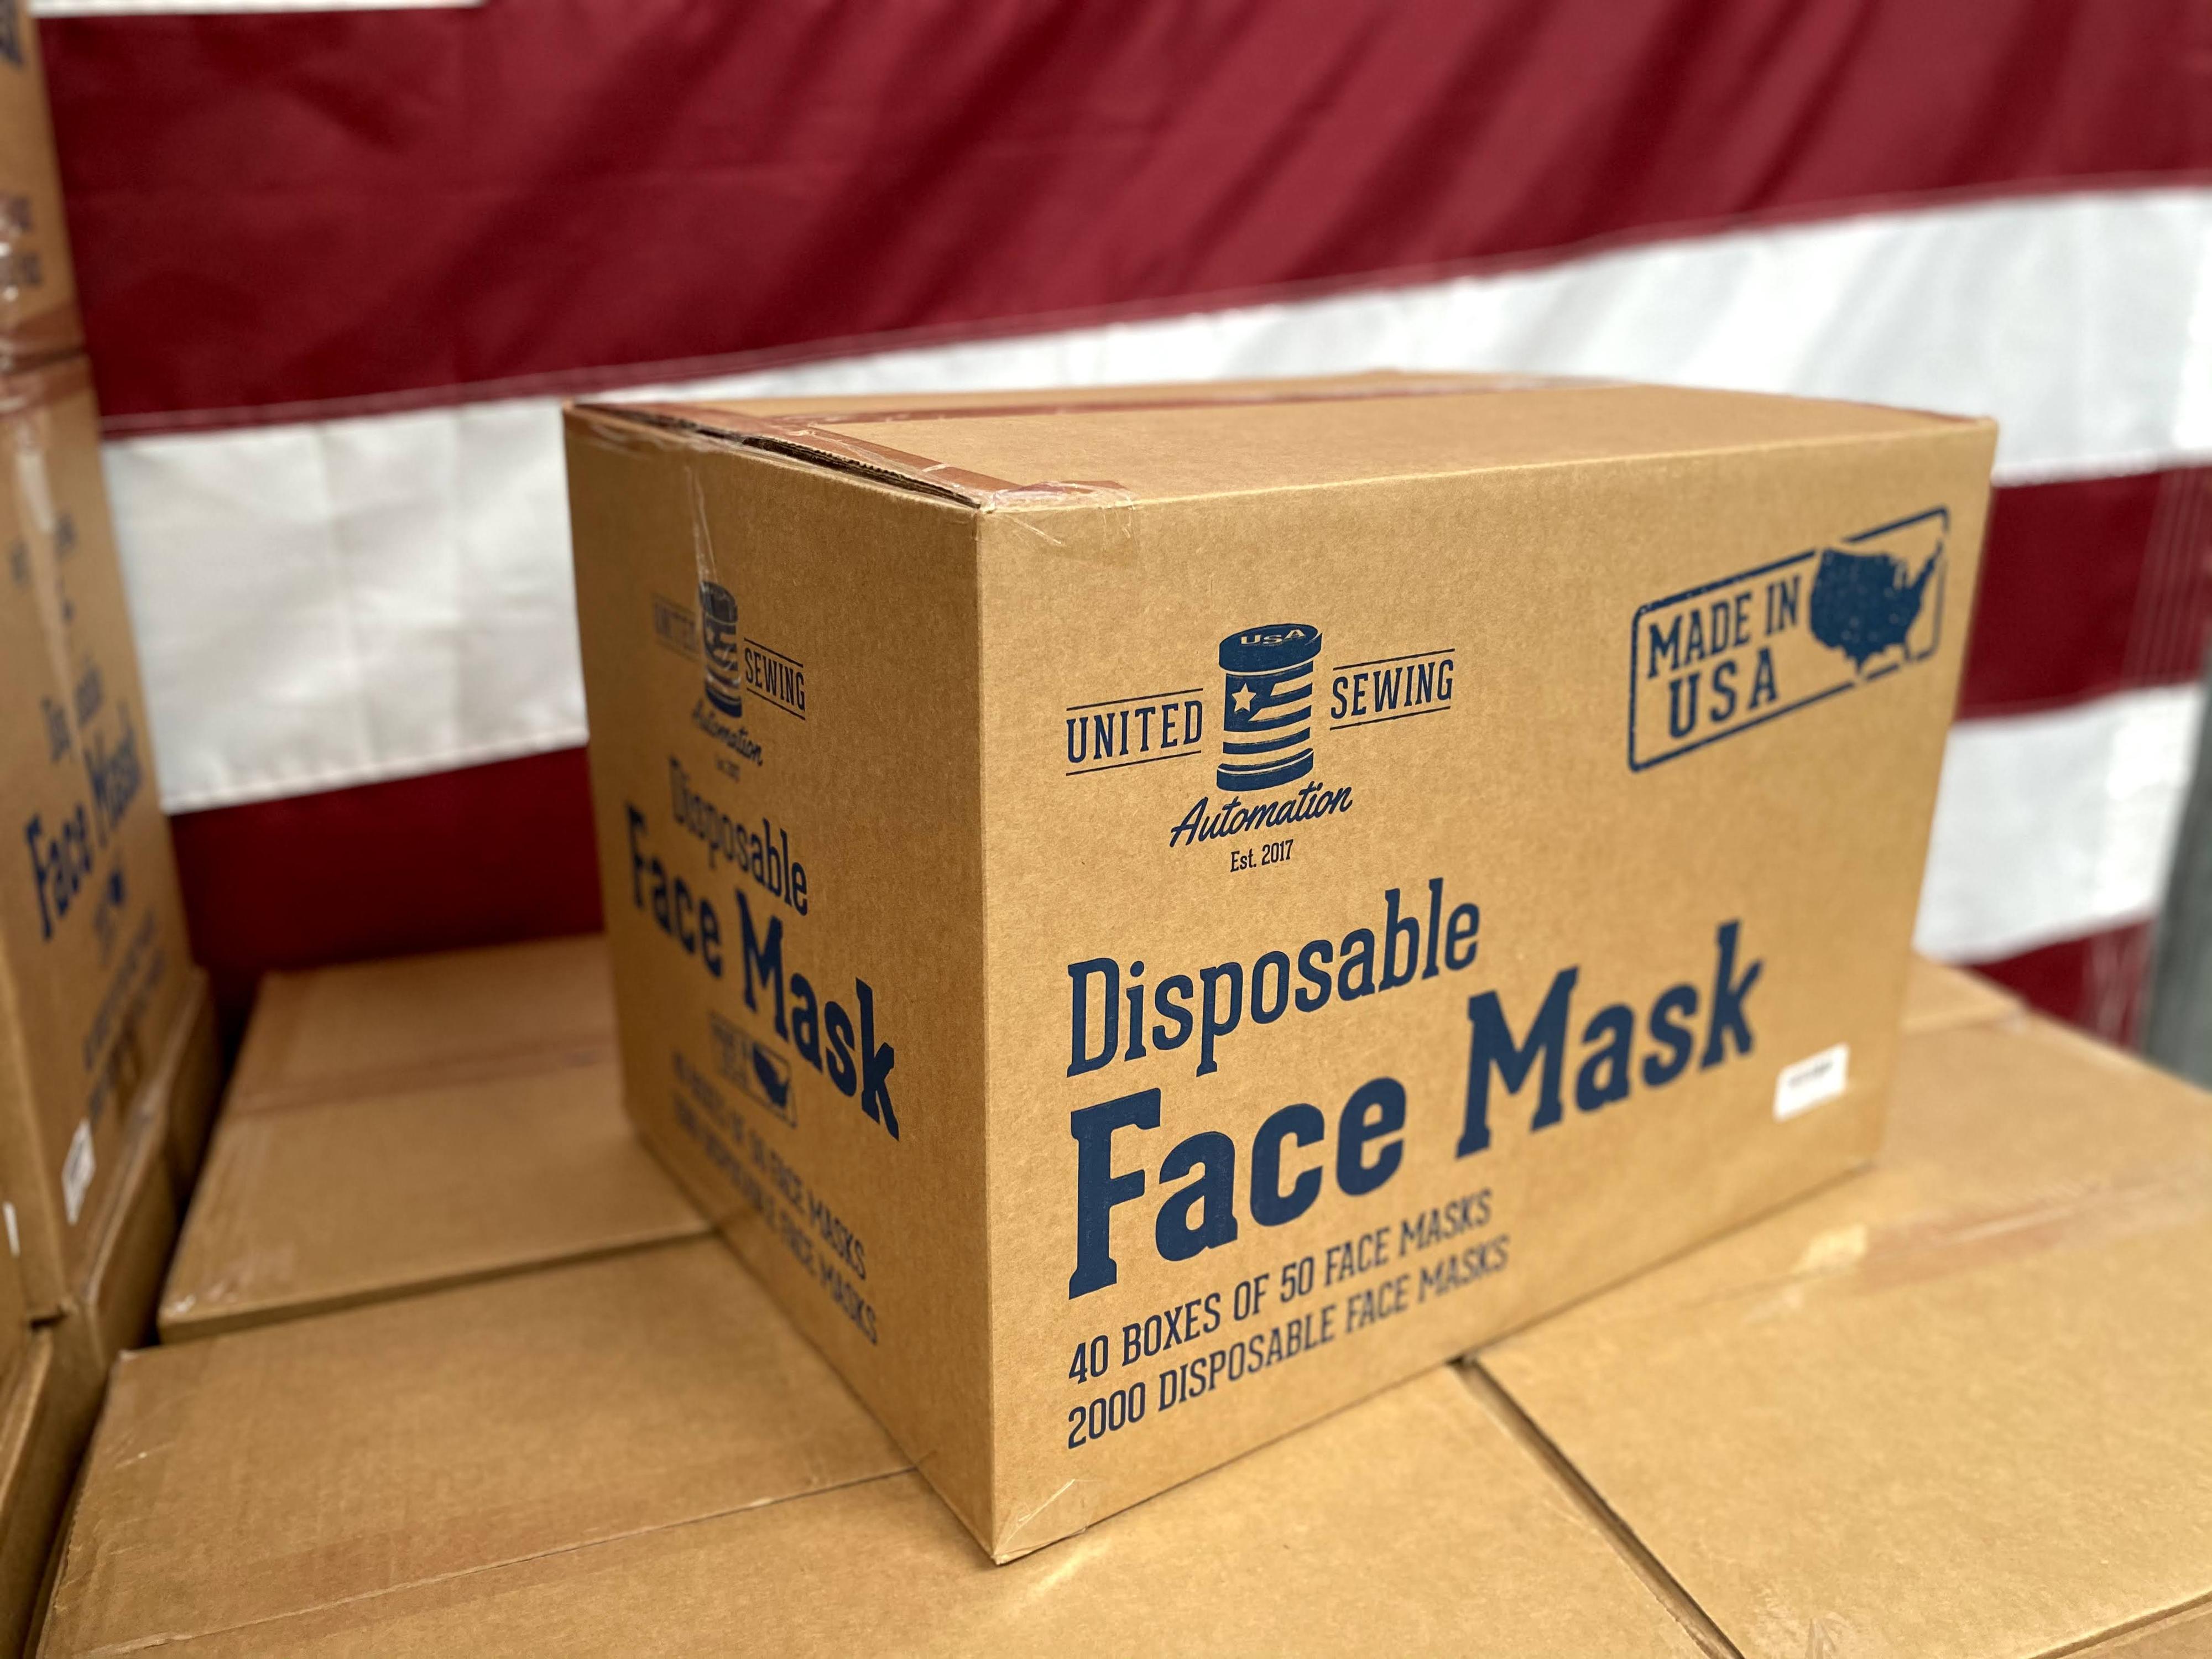 MADE IN USA - Kids - ASTM Level 3 - 510K FDA Product code FXXX - Disposable 3-ply Face Masks - Case